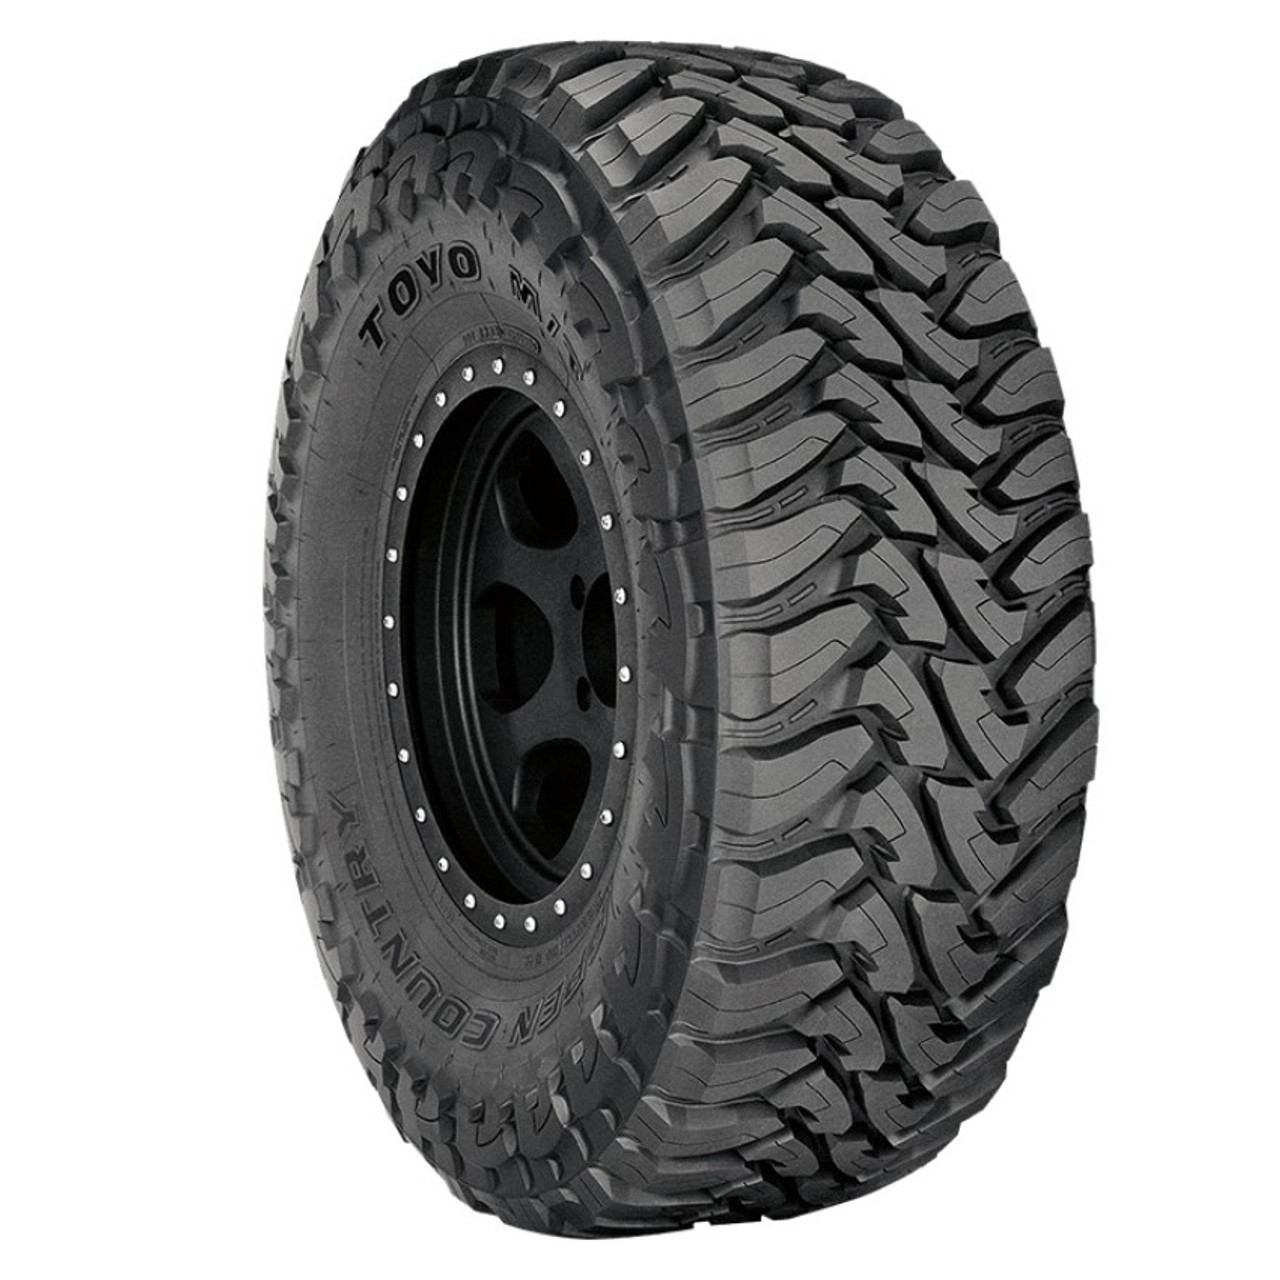 Toyo Open Country M/T Tire - 33X1350R15 109Q C/6